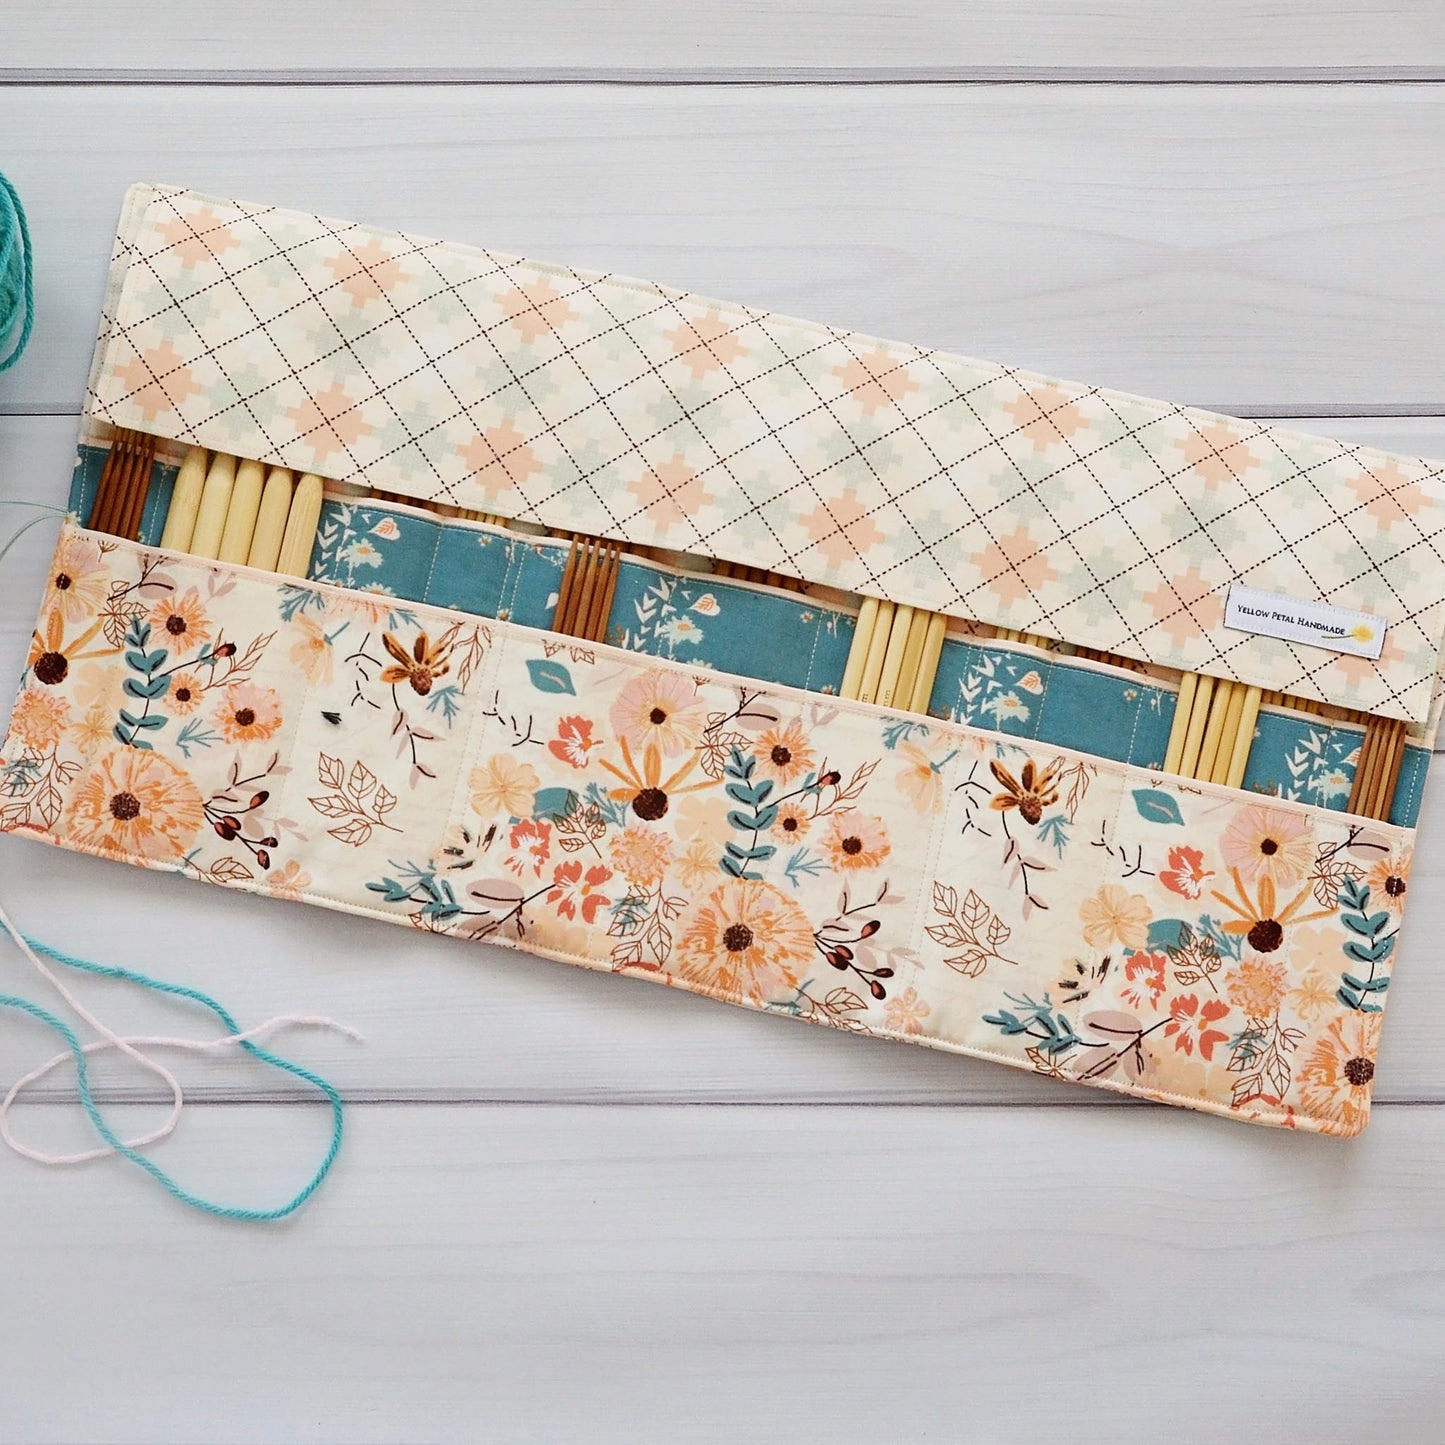 Quilted Trifold Case for Knitting DPNs and Crochet Hooks